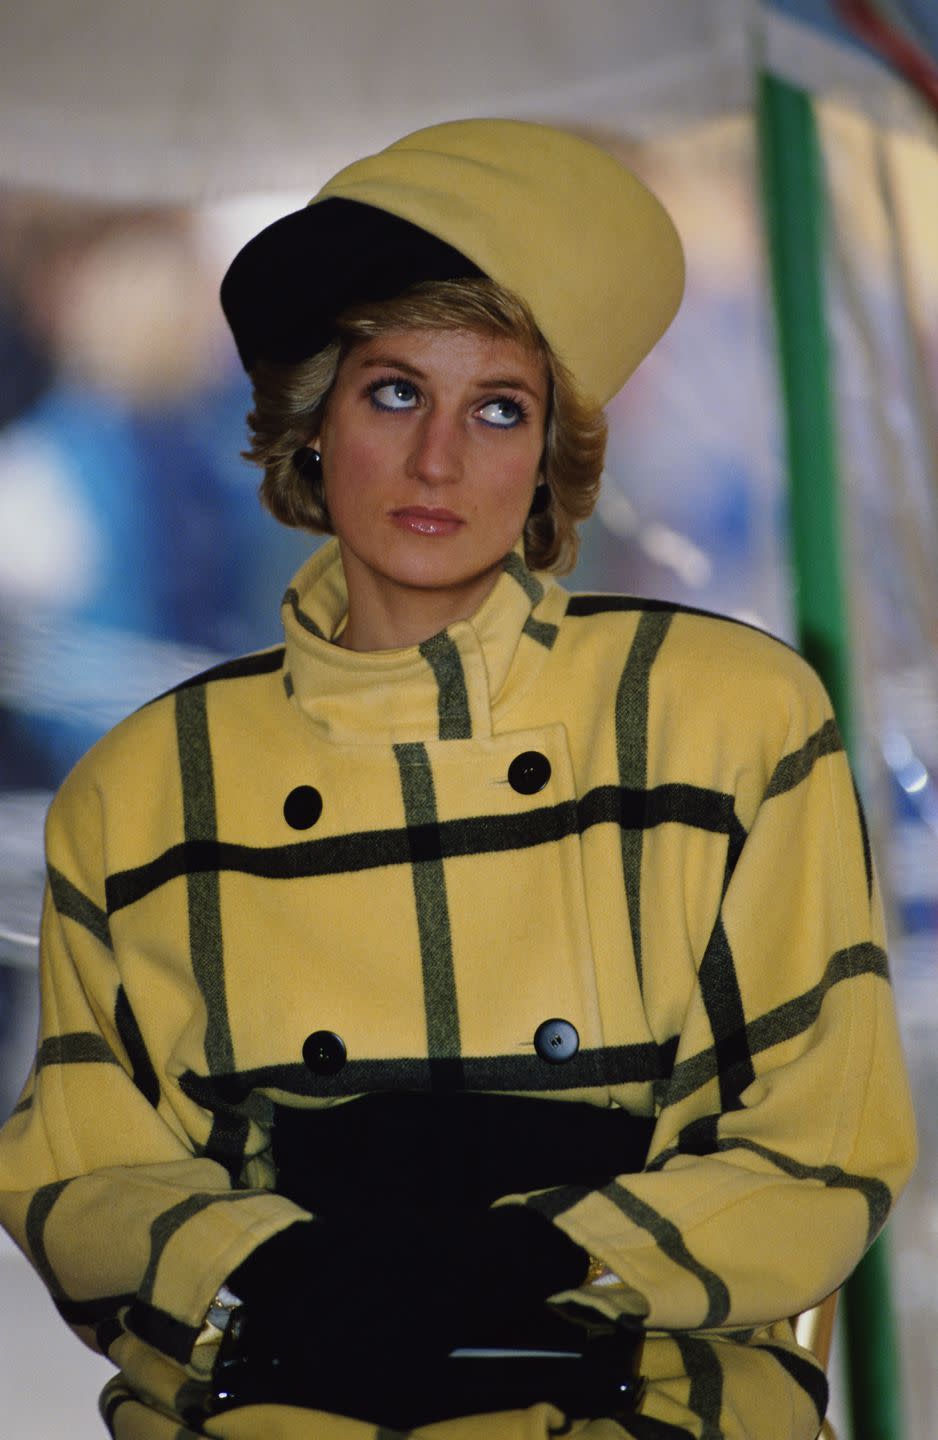 Photo credit: Princess Diana Archive - Getty Images